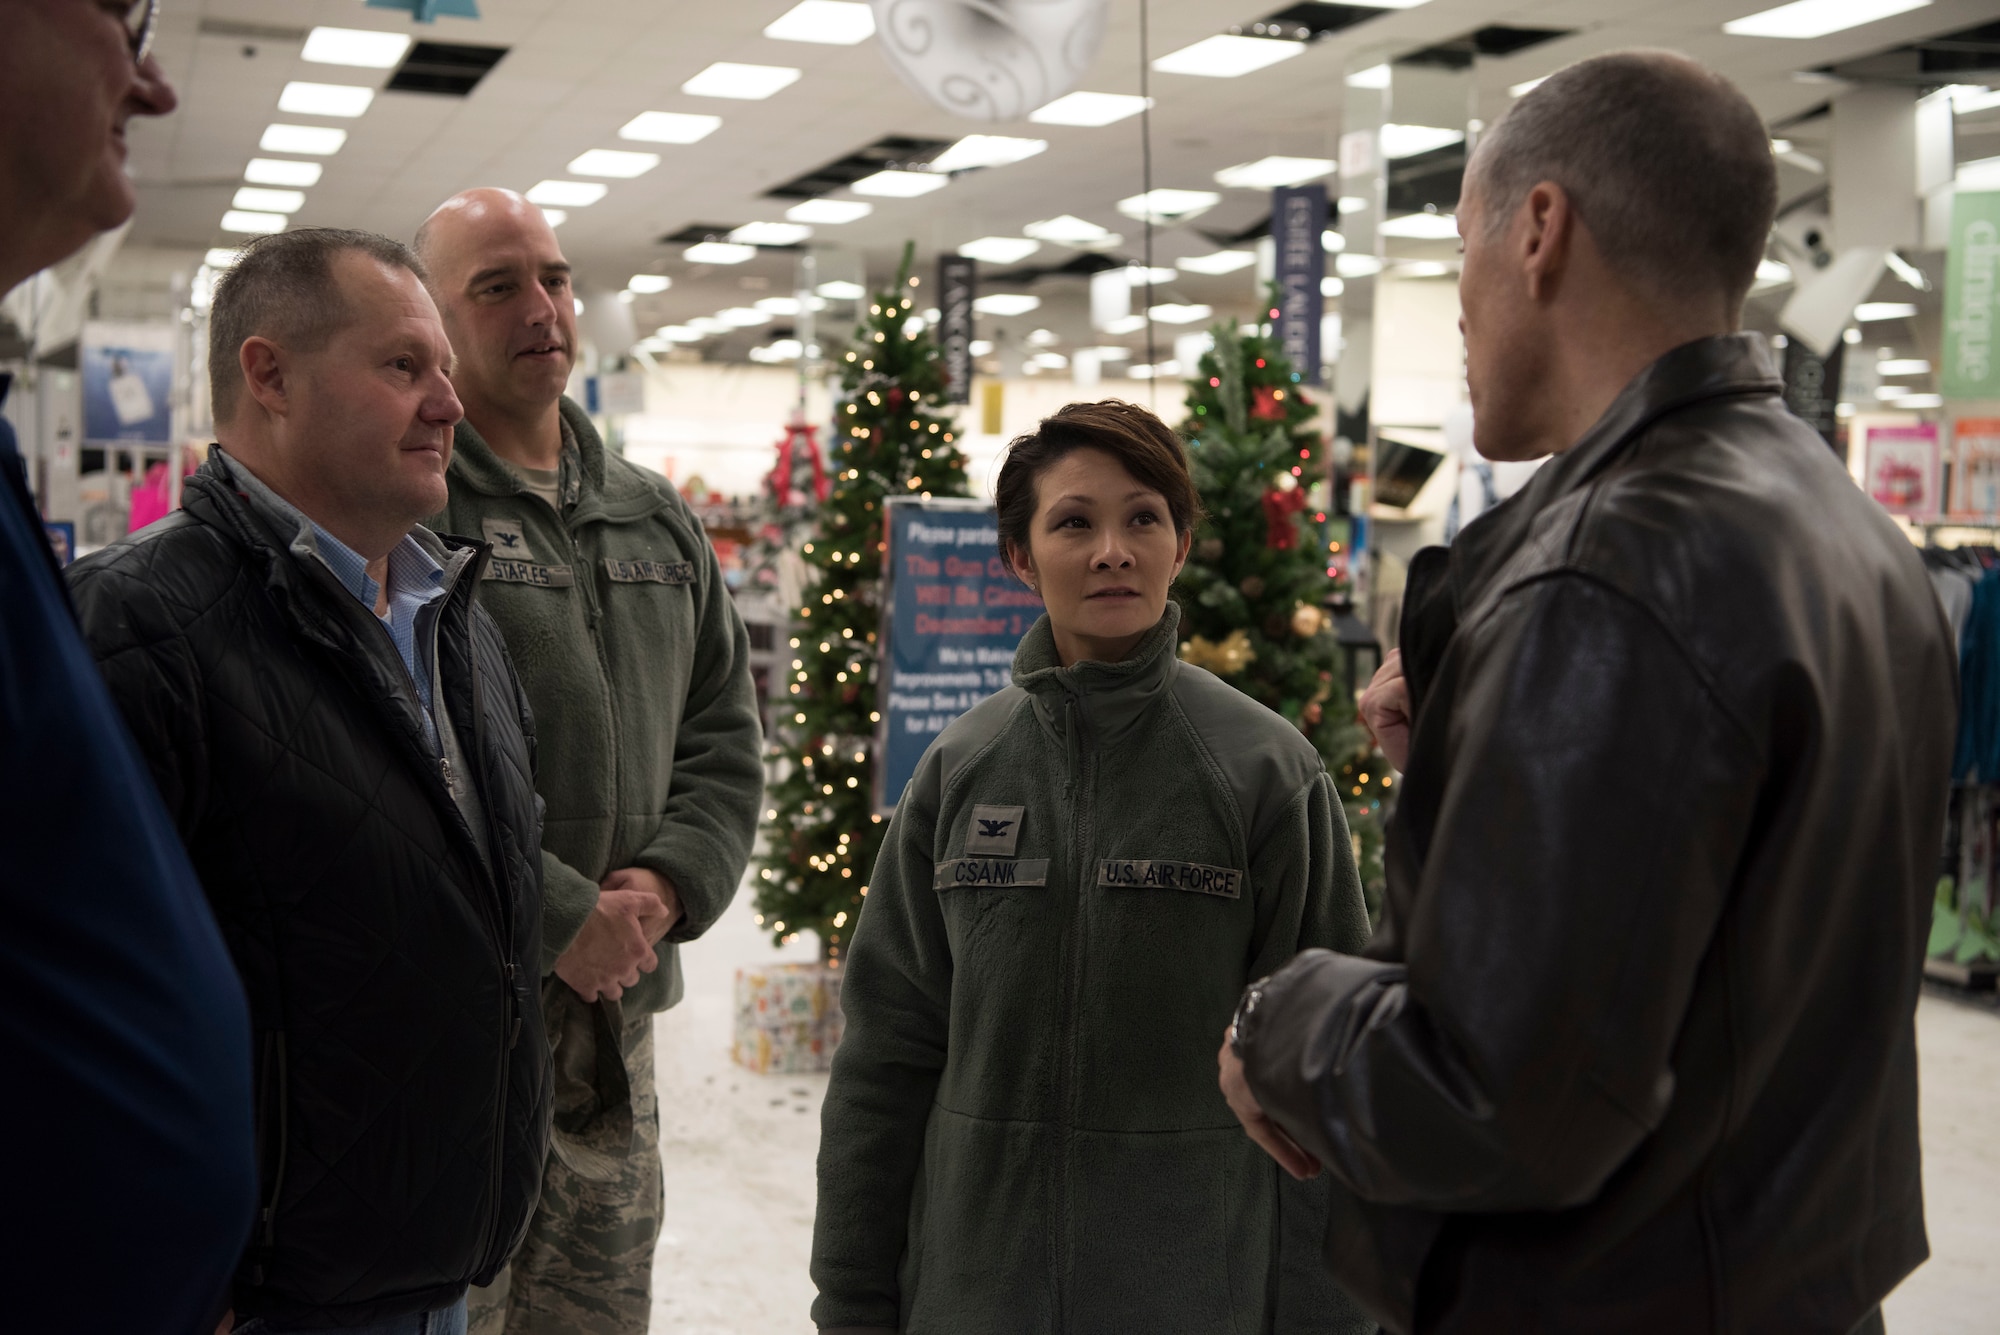 Air Force Lt. Gen. Tom Bussiere, Commander of Alaskan North American Aerospace Defense Command, Alaskan Command, and the Eleventh Air Force, speaks to 673d Air Base Wing Commander Col. Patricia A. Csànk, 673d Civil Engineer Group Commander Col. Michael R. Staples and Army and Air Force Exchange Service store management about the status of the Exchange. In less than 48 hours after the 7.0 magnitude Earthquake striking the Anchorage area at 8:29 a.m. the morning of Nov.30, 2018, JBER is mission ready and capable of resuming regular operations.